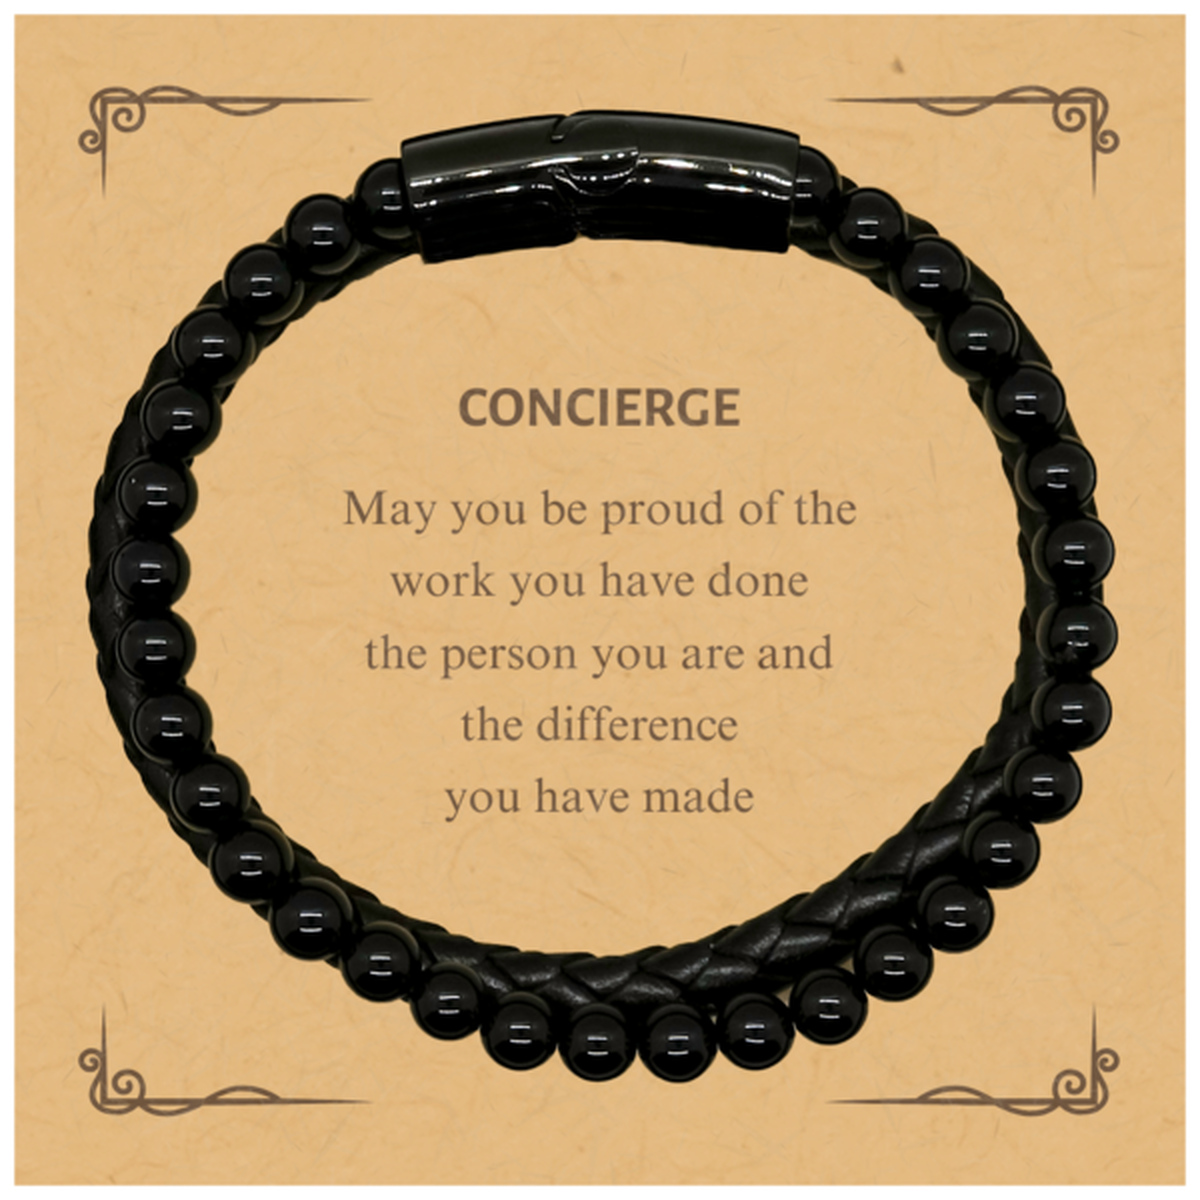 Concierge May you be proud of the work you have done, Retirement Concierge Stone Leather Bracelets for Colleague Appreciation Gifts Amazing for Concierge